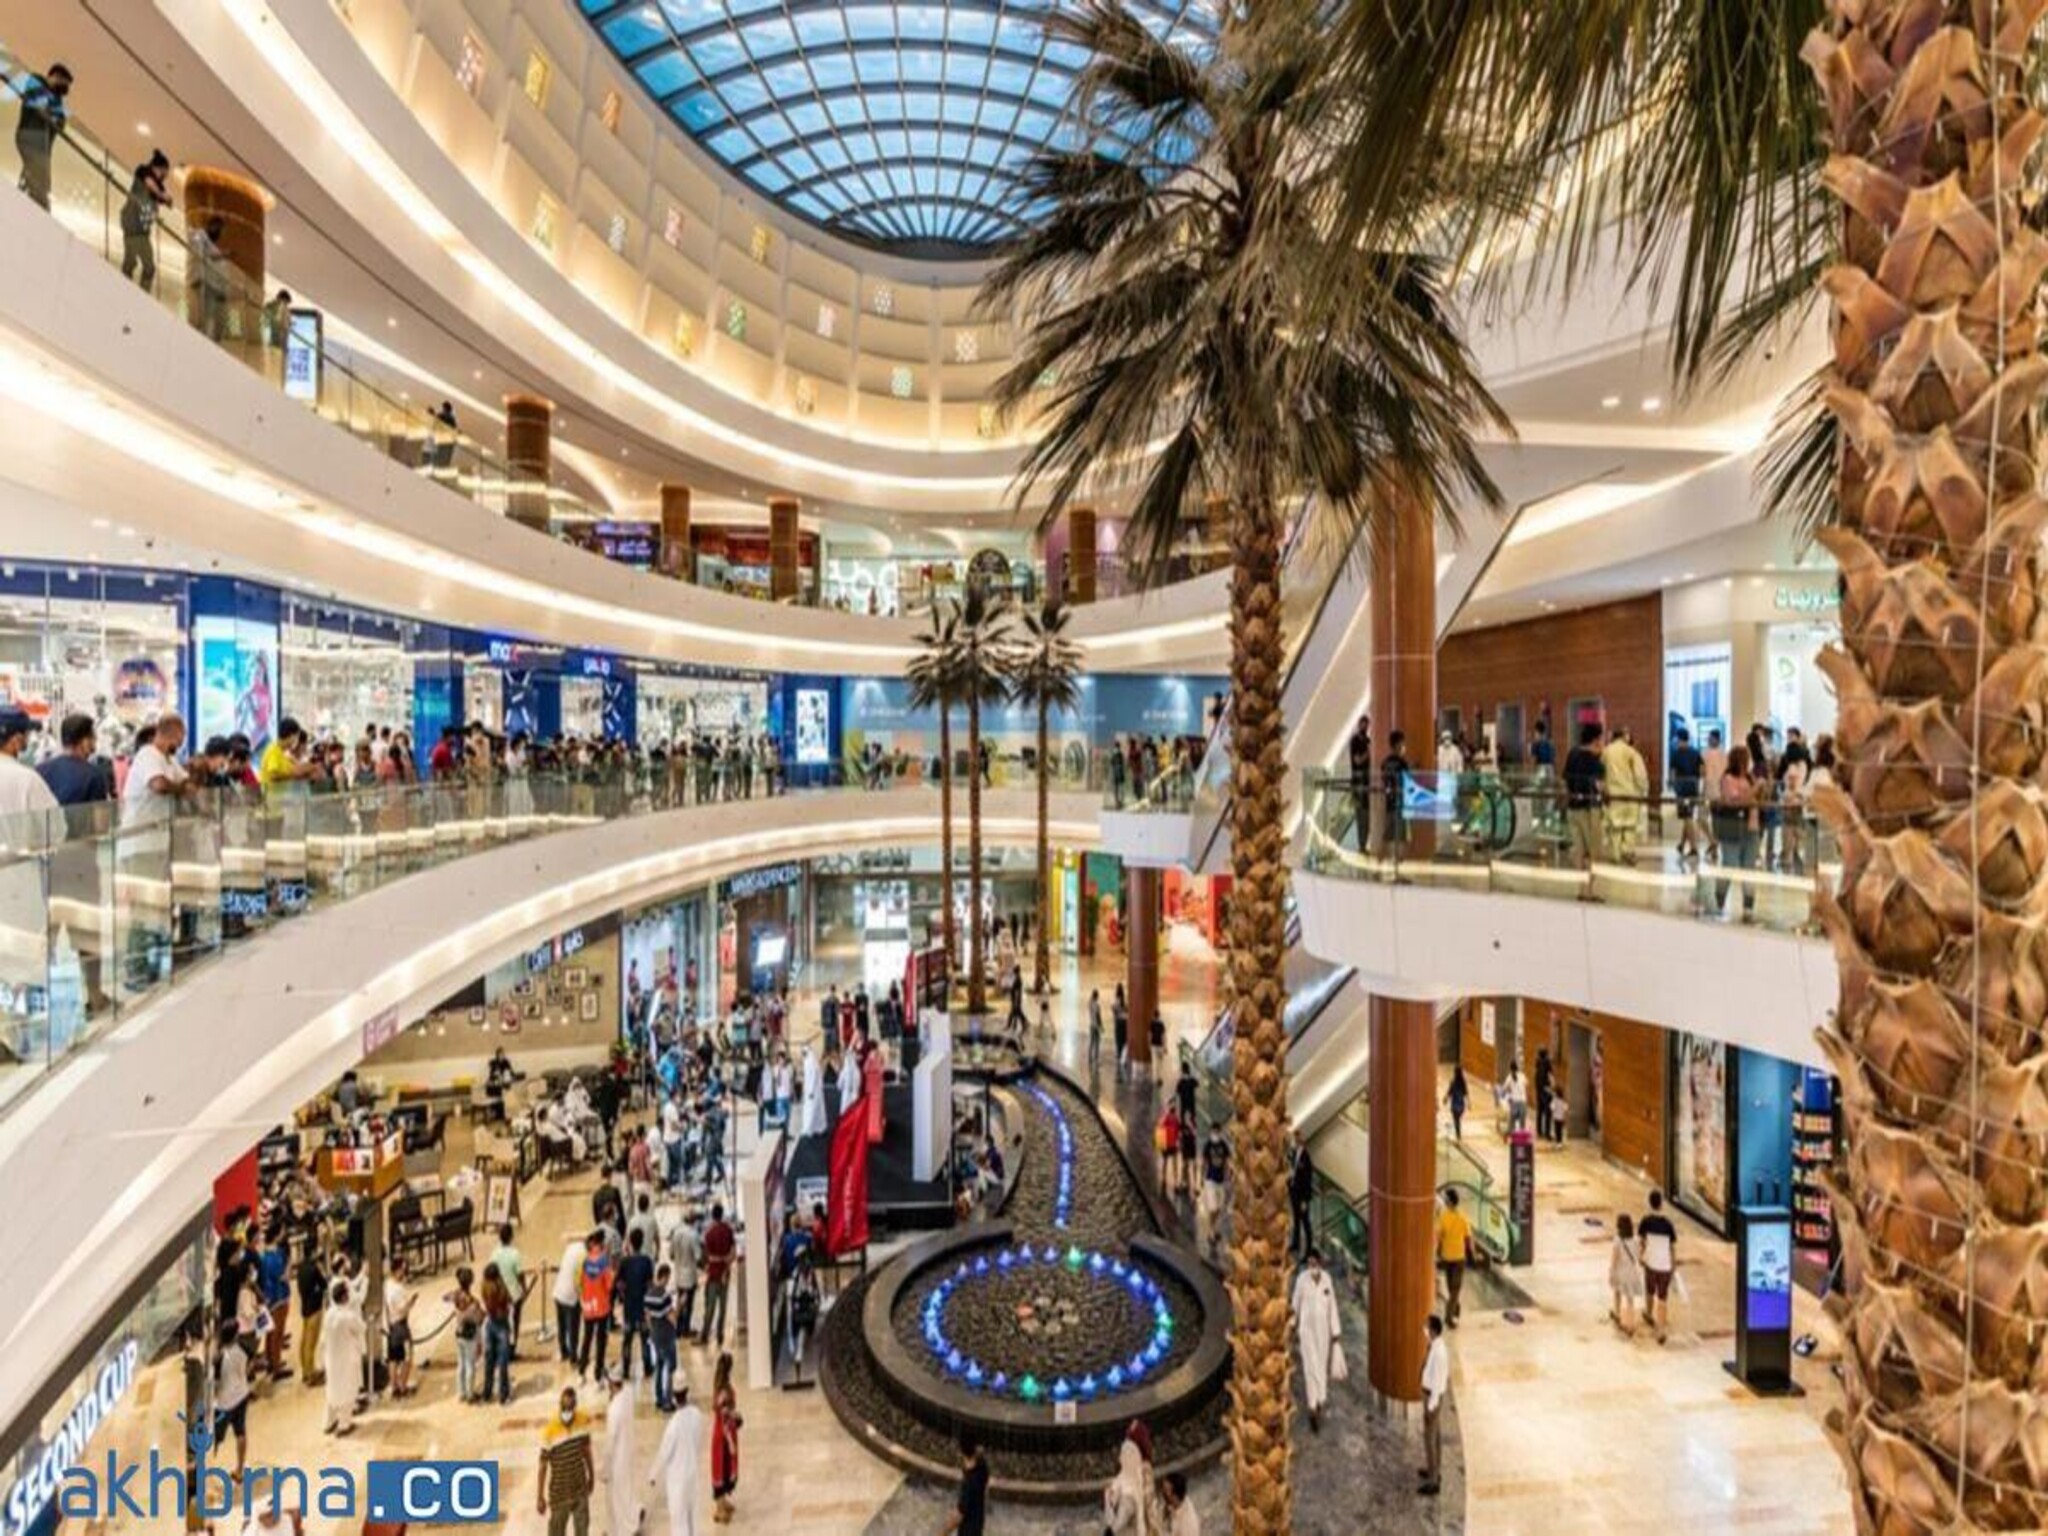 Dubai introduces Dh200,000 Prizes, Shopping Deals, and Staycation offers for Eid